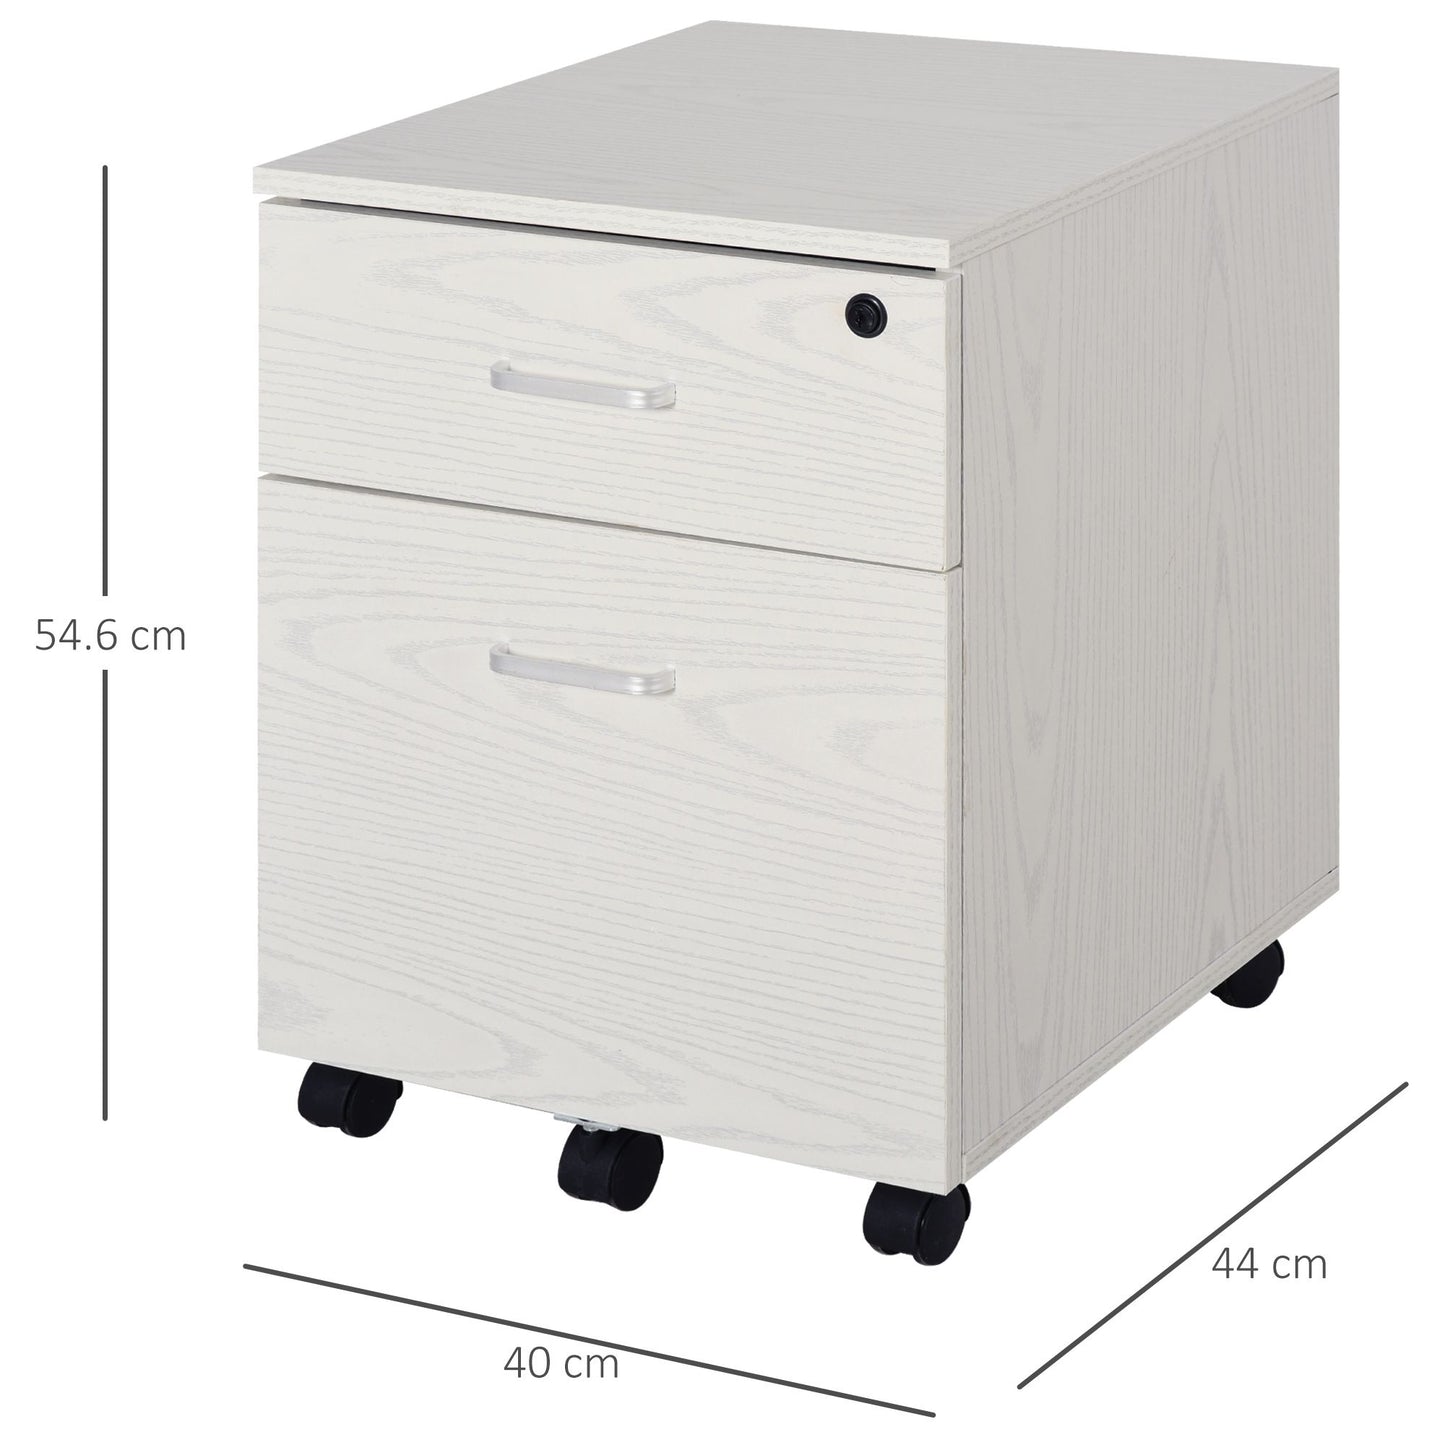 ProperAV Extra 2-Drawer Locking Office Filing Cabinet with 5 Wheels - maplin.co.uk